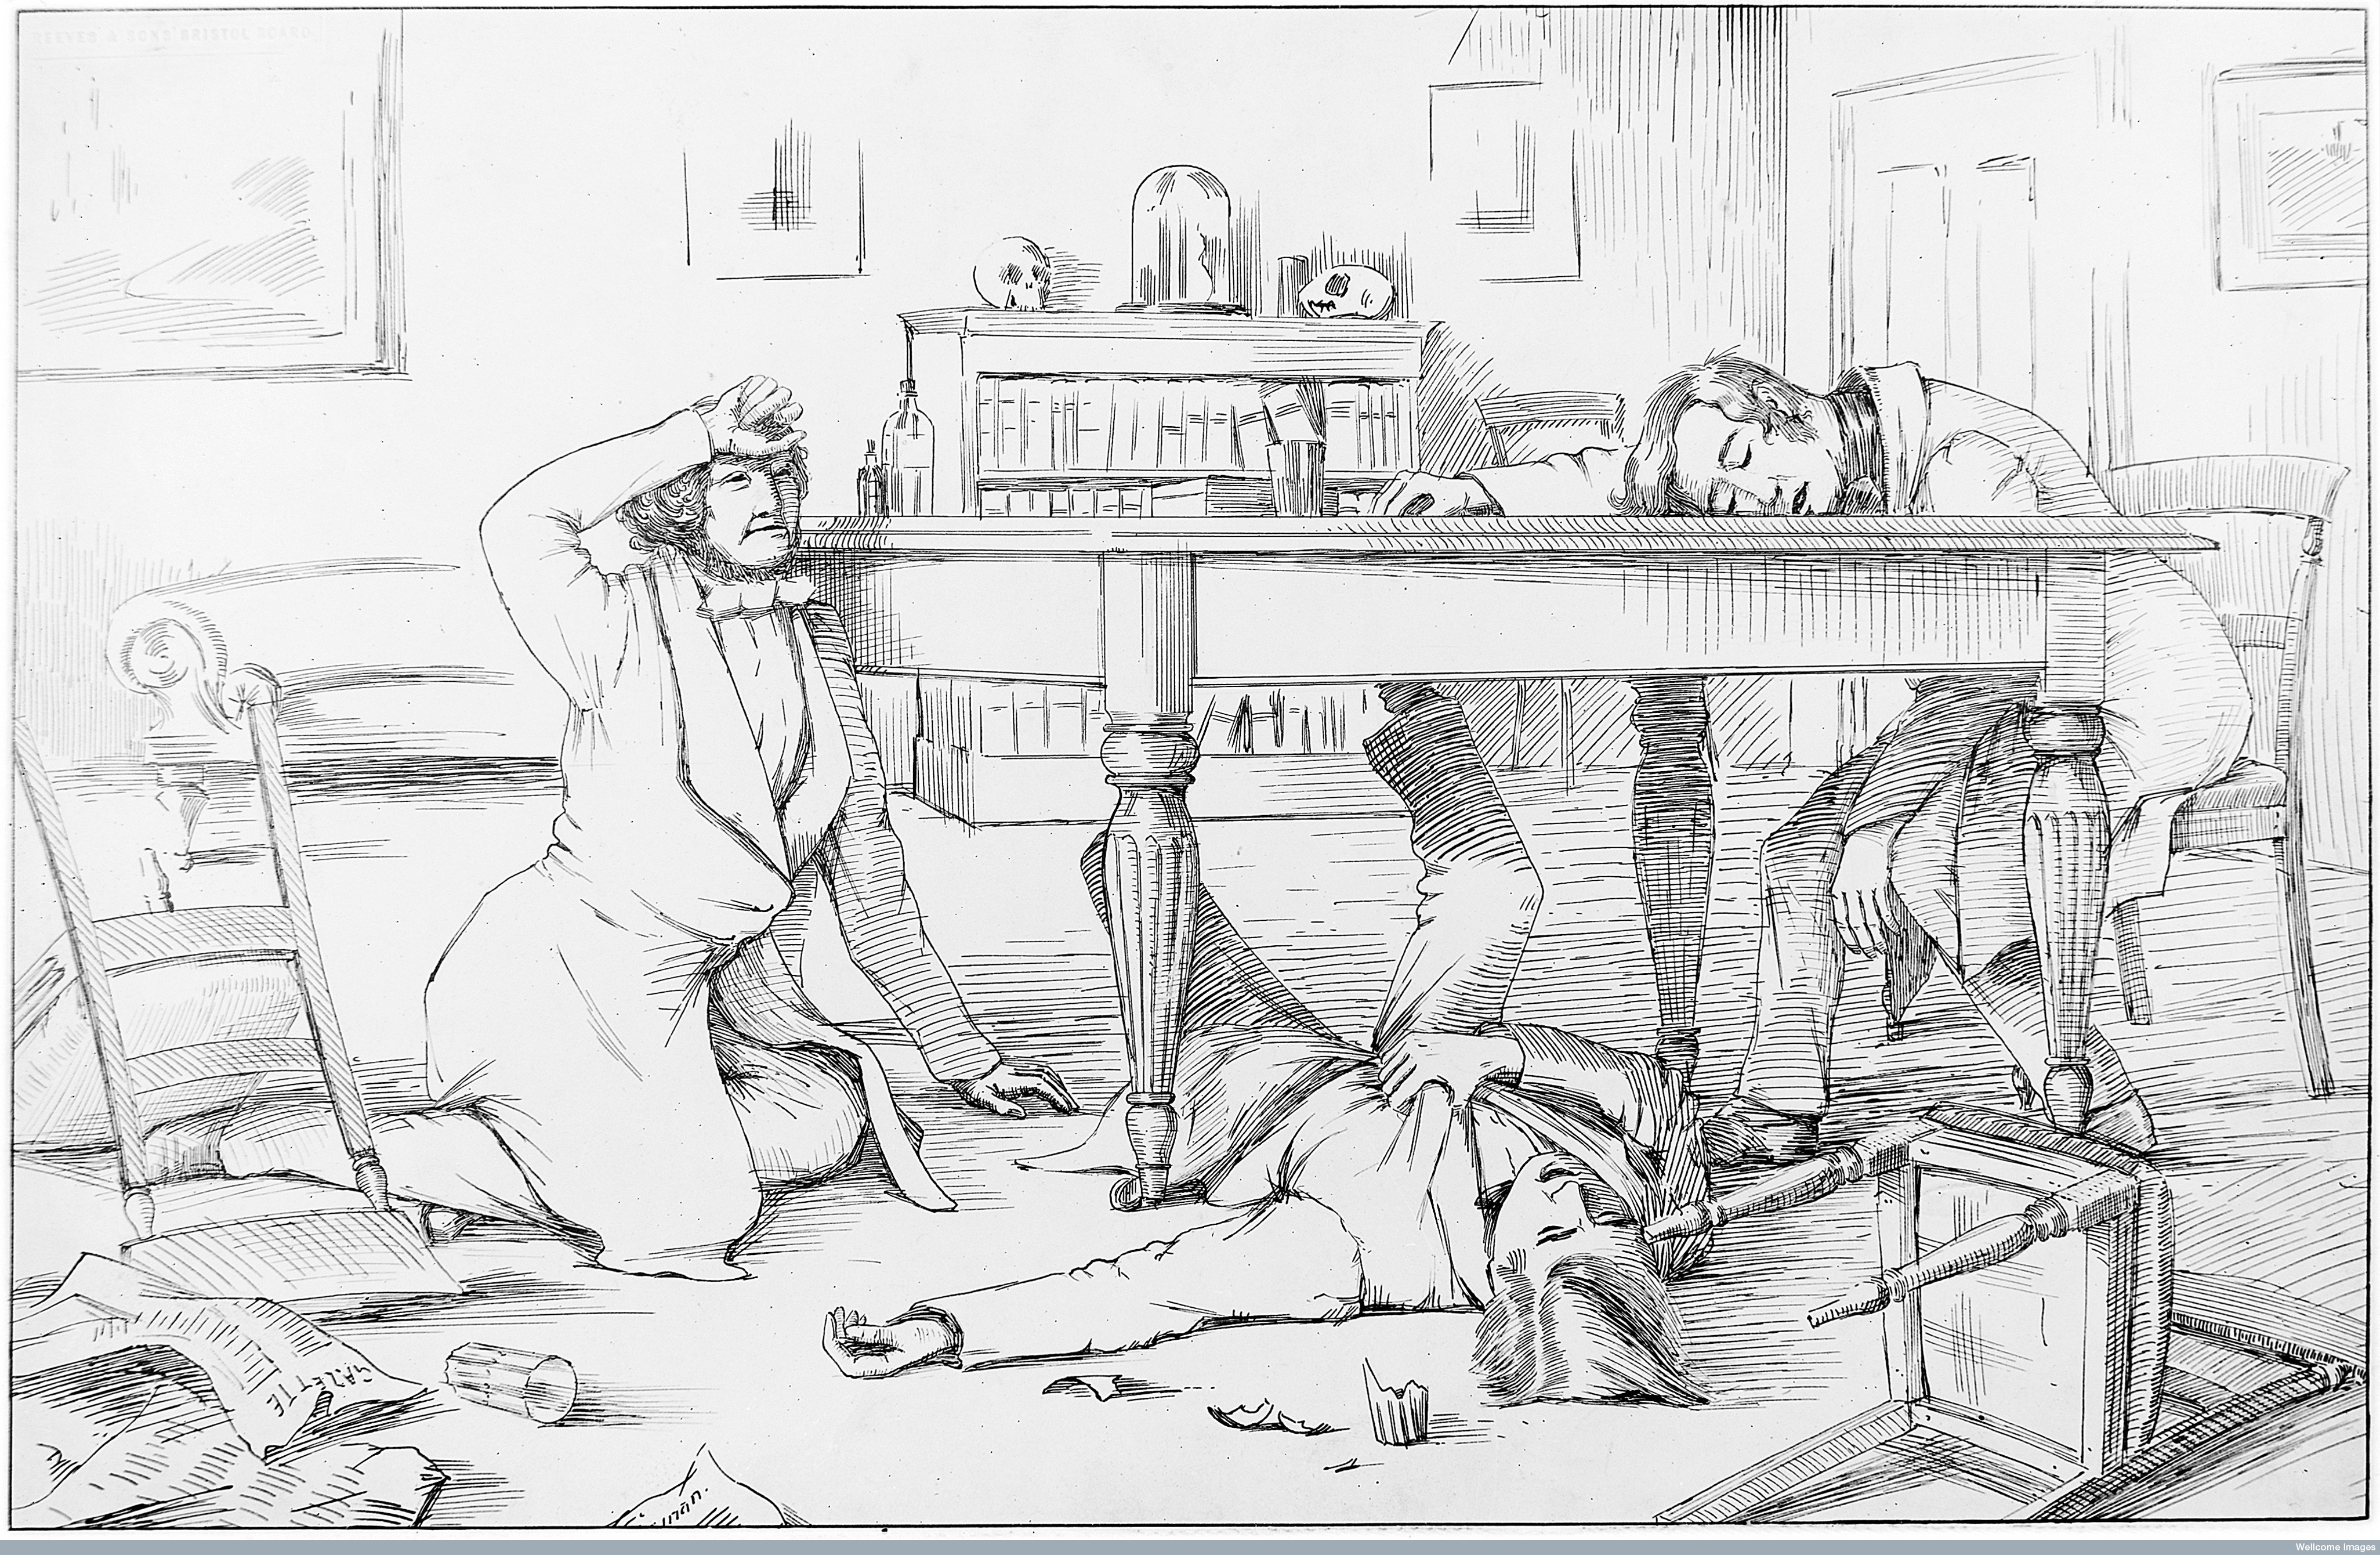 The dinner party where the effects of chloroform were discovered by Simpson and his assistants, 4 November 1847.